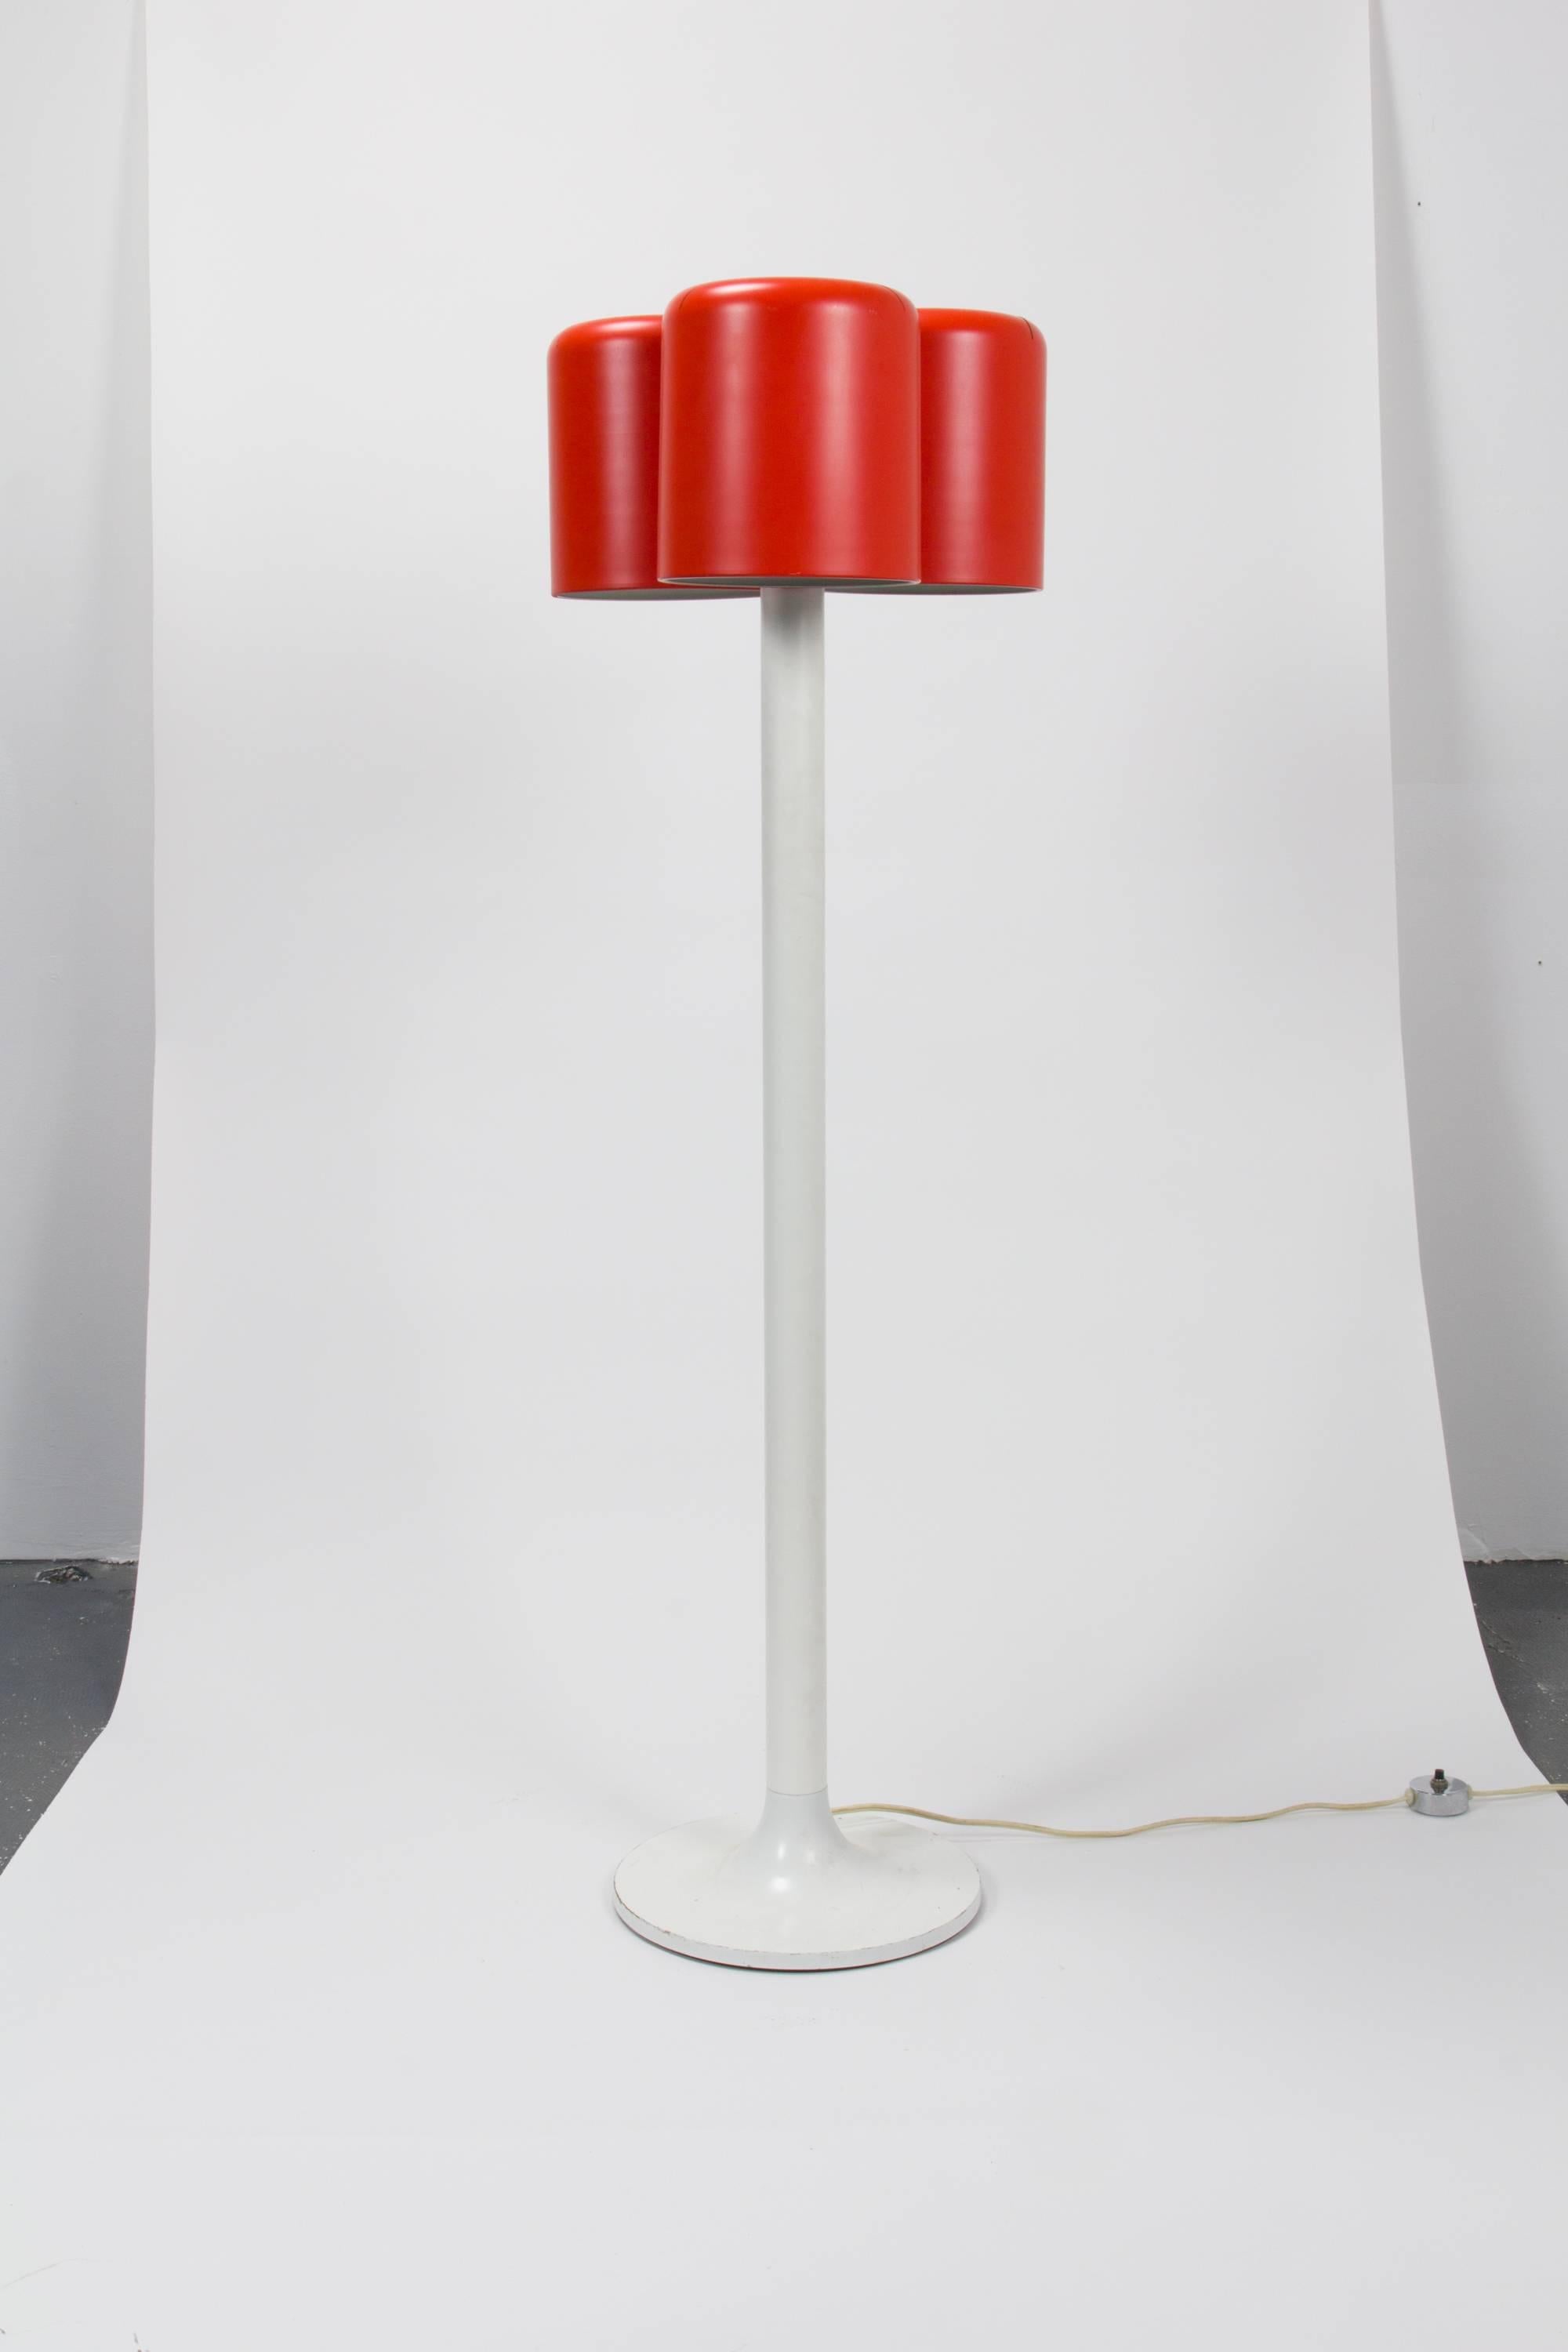 Uncommon three-shade floor lamp by Walter Von Nessen having three satin red cylindrical metal shades and white enamel body.